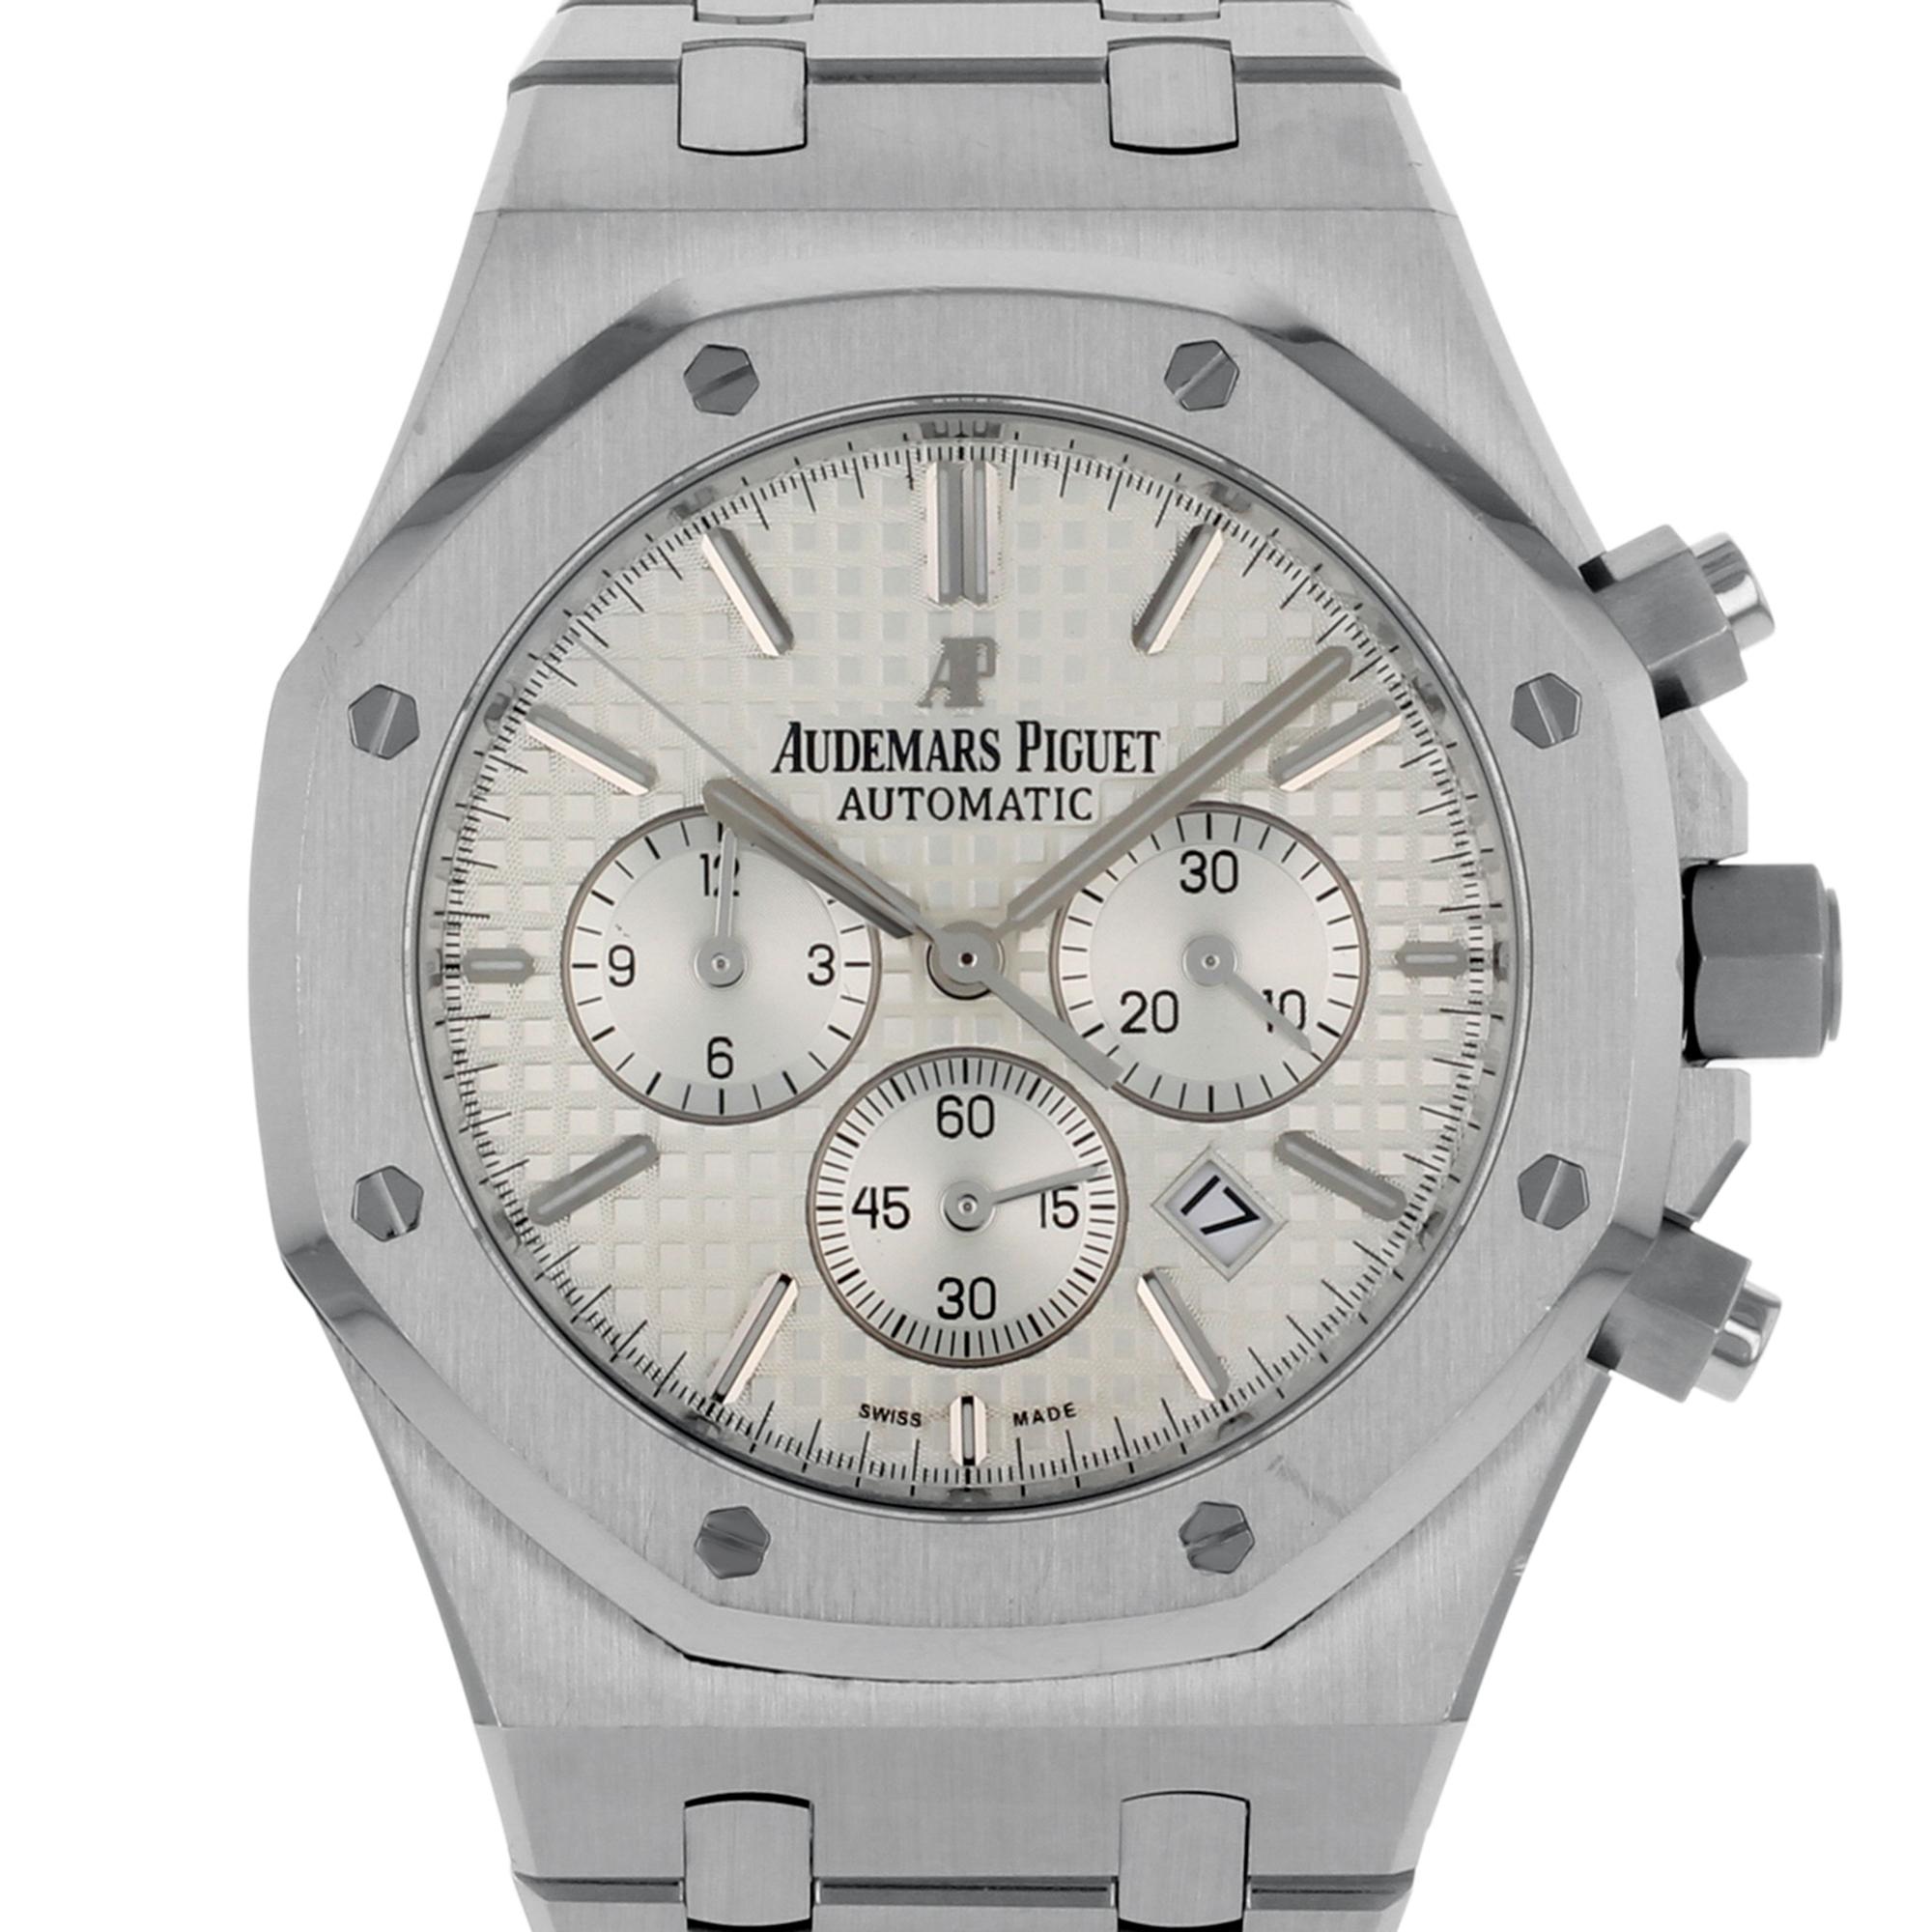 This pre-owned Audemars Piguet Royal Oak 26320ST.OO.1220ST.02 is a beautiful men's timepiece that is powered by an automatic movement which is cased in a stainless steel case. It has a round shape face, chronograph, date, small seconds subdial dial